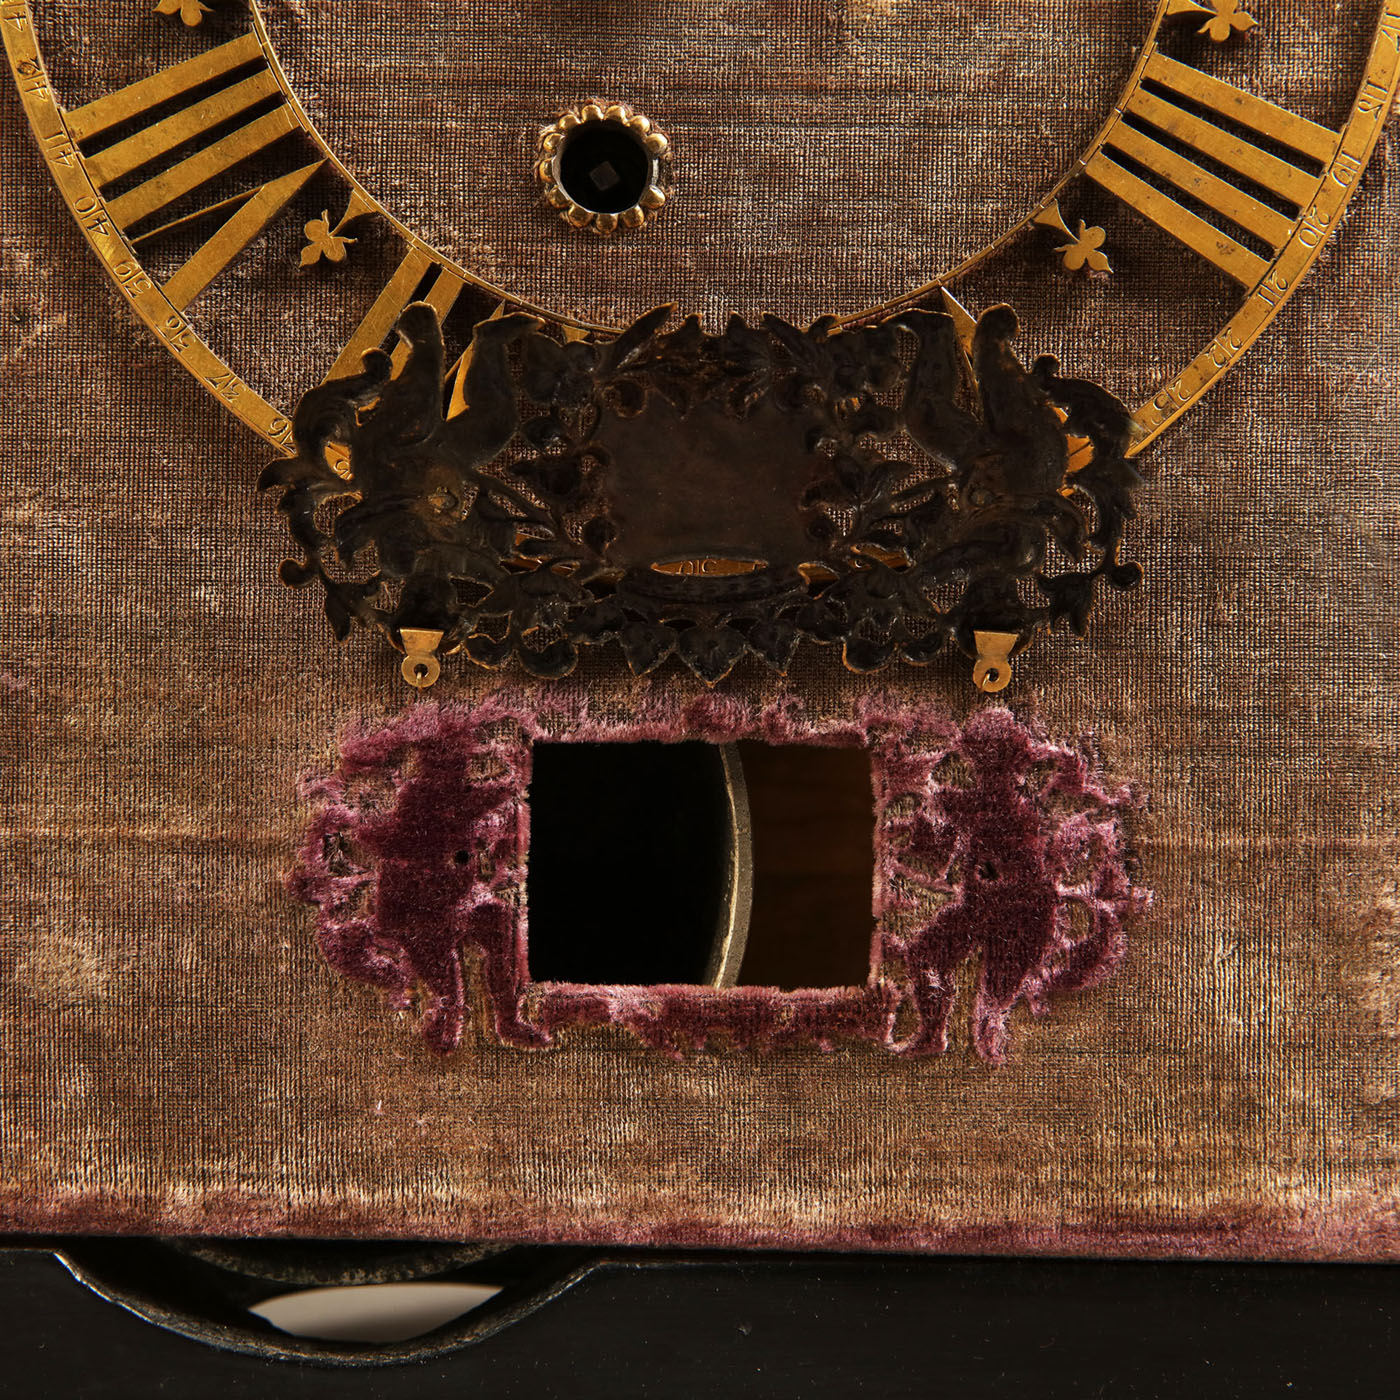 17th Century Hague Clock Signed by Pieter Visbagh